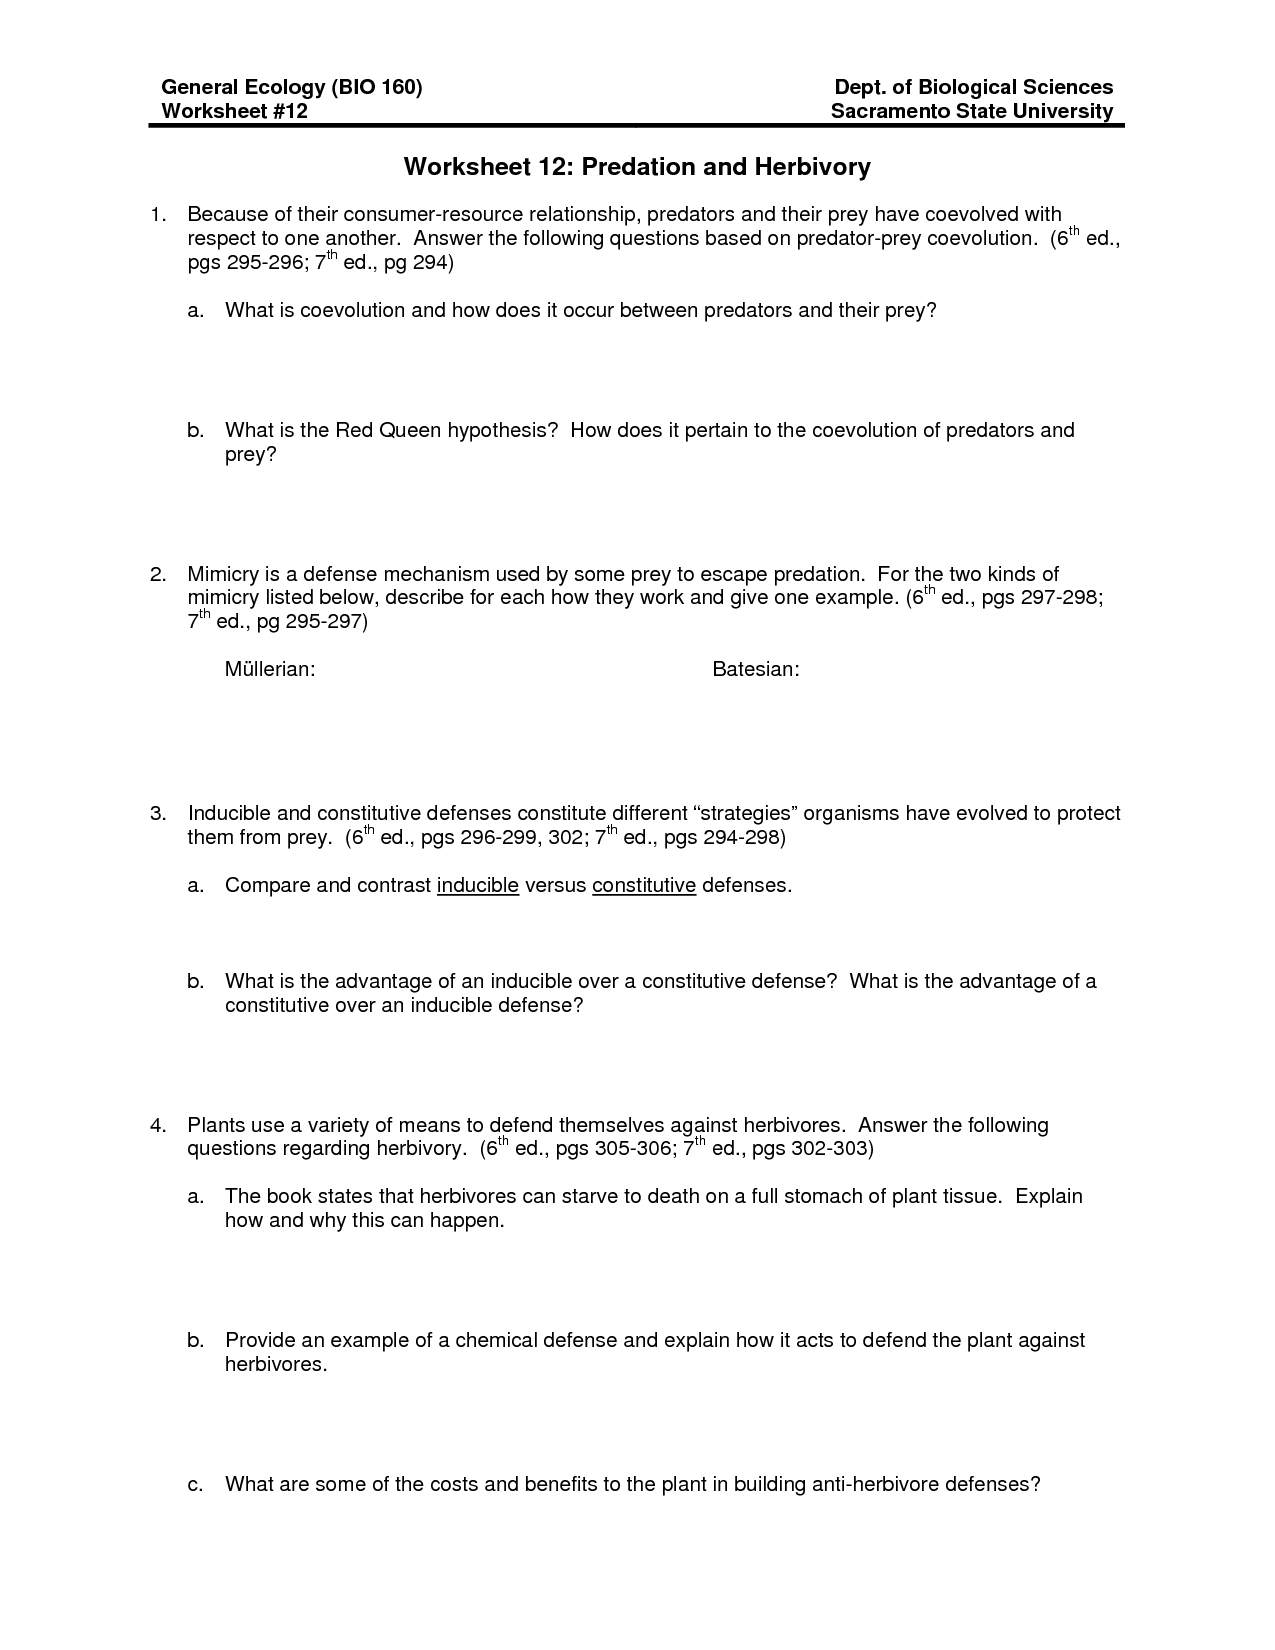 11-best-images-of-question-answer-relationship-worksheets-qar-question-stems-qar-worksheet